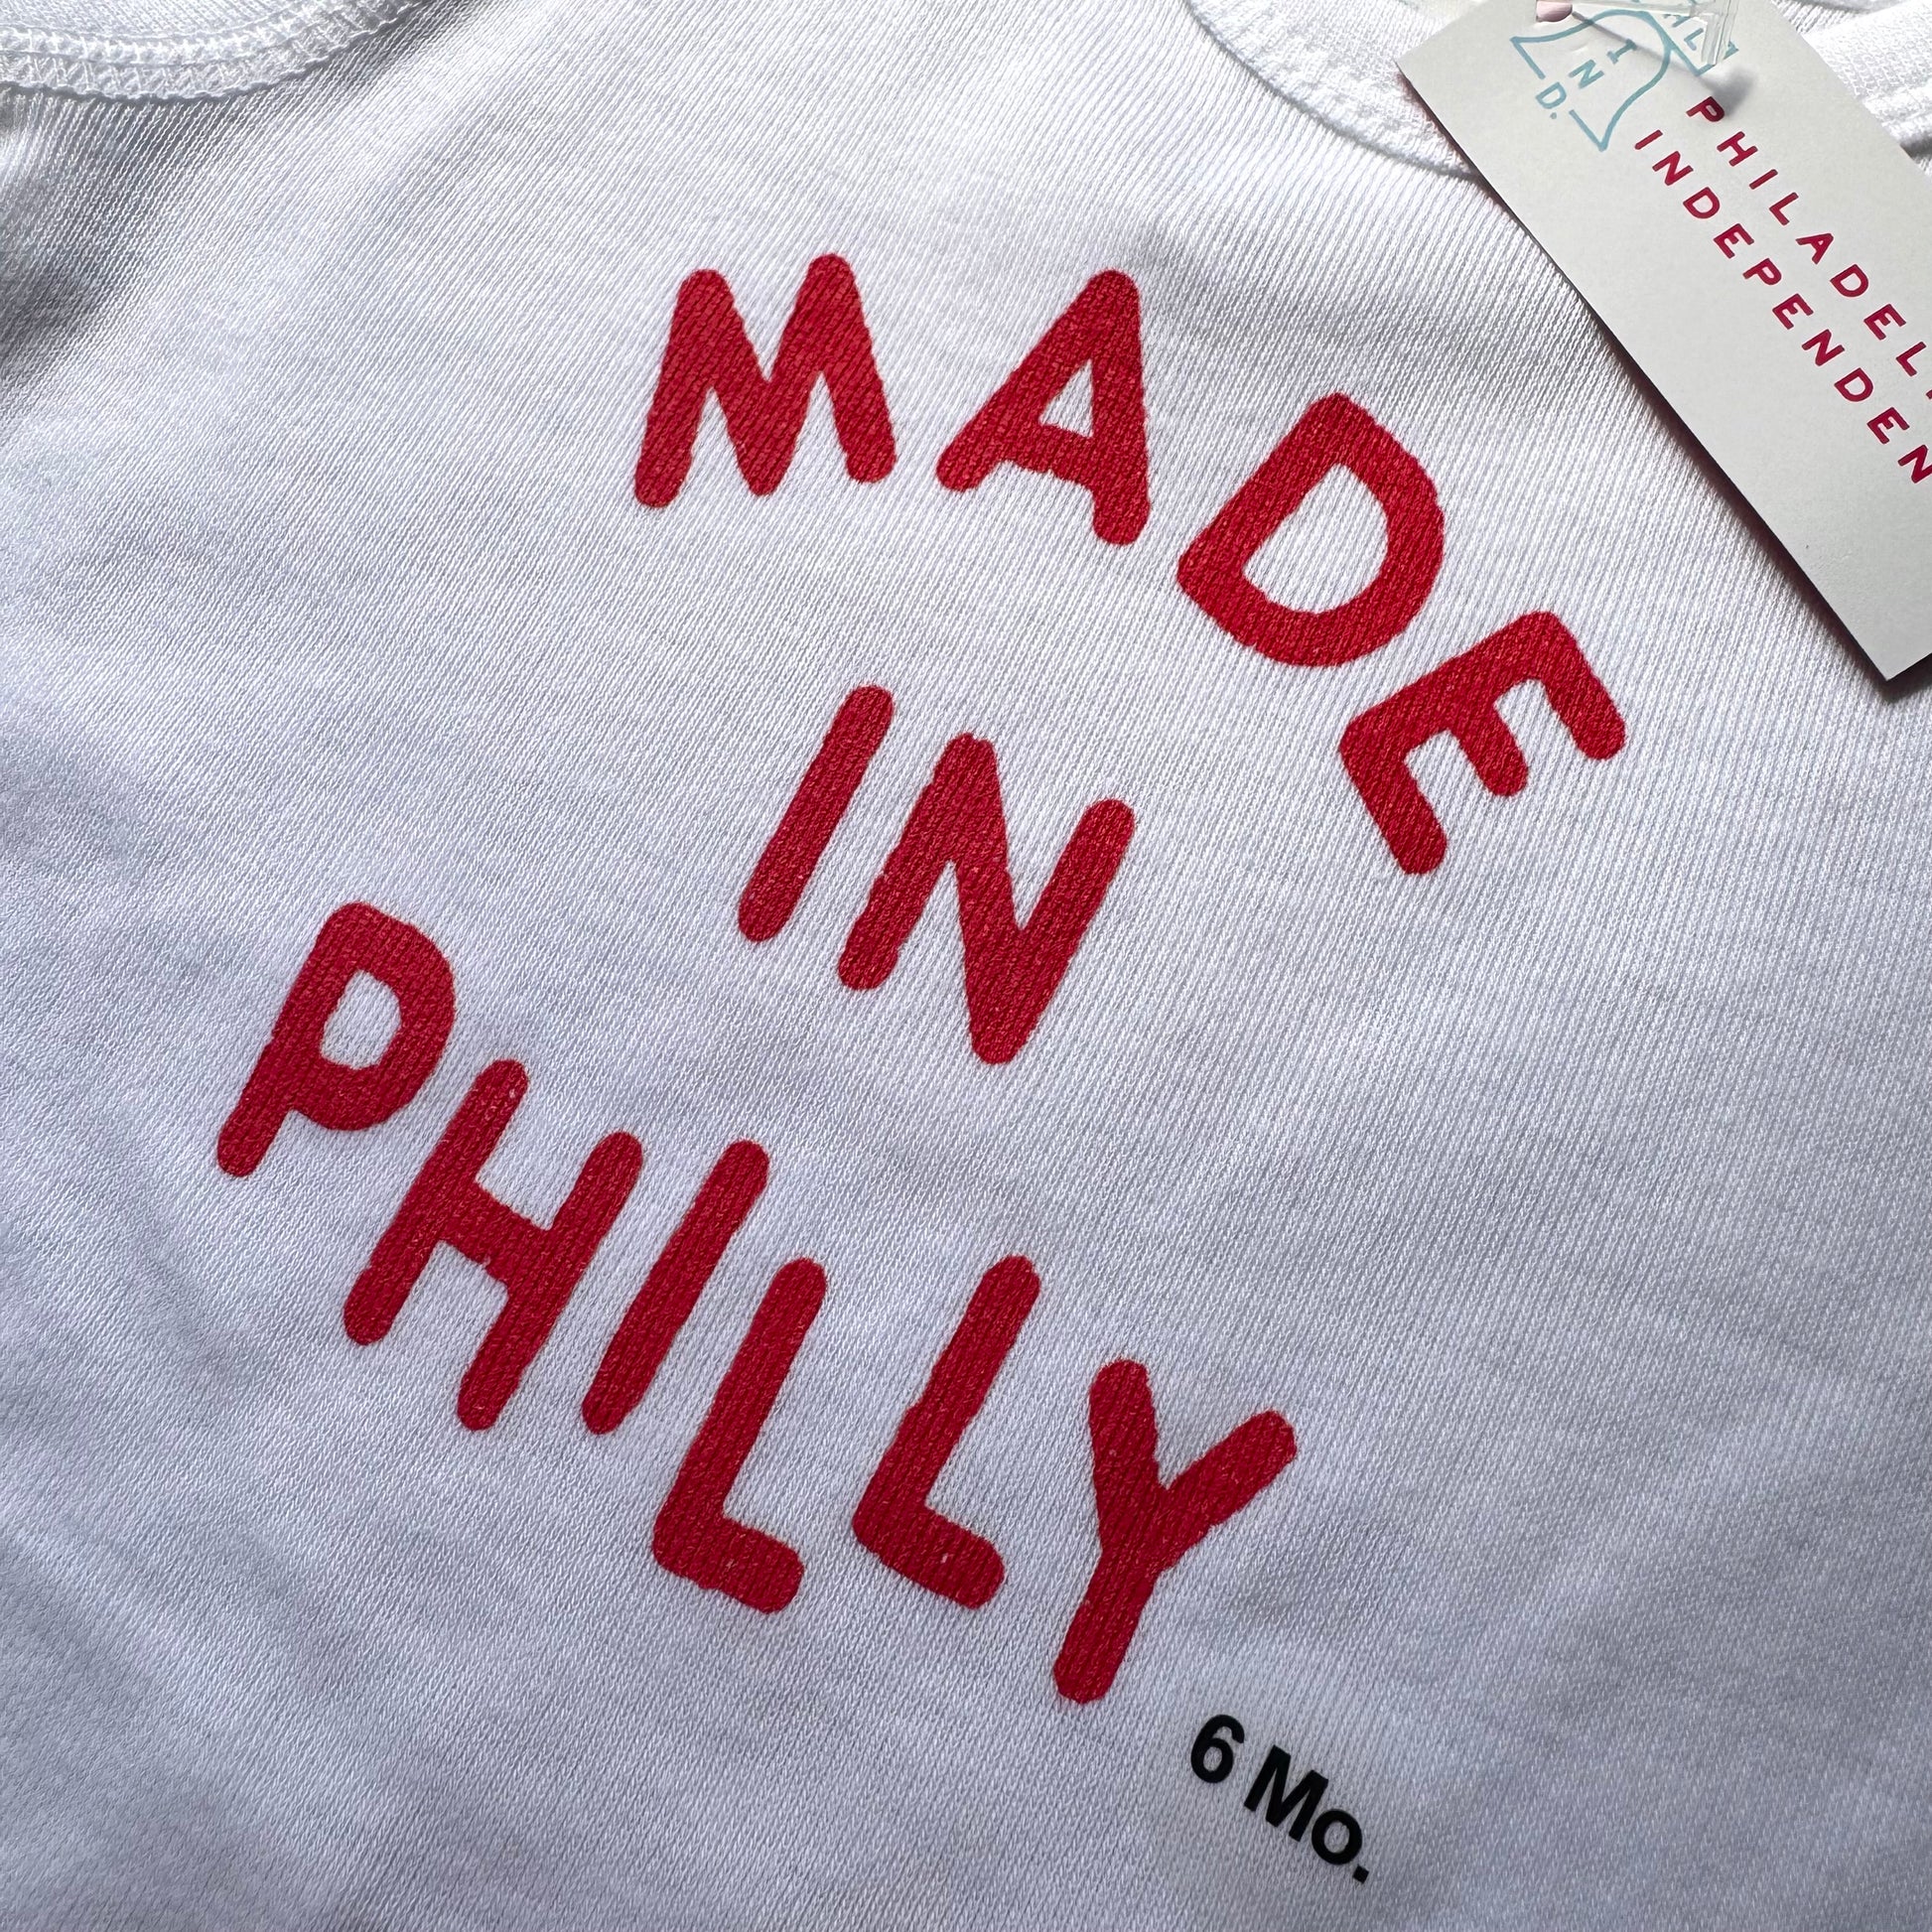 Philadelphia Independents Made in Philly Baby Onesie, featuring a tag indicating 6 months size and crafted from 100% cotton.